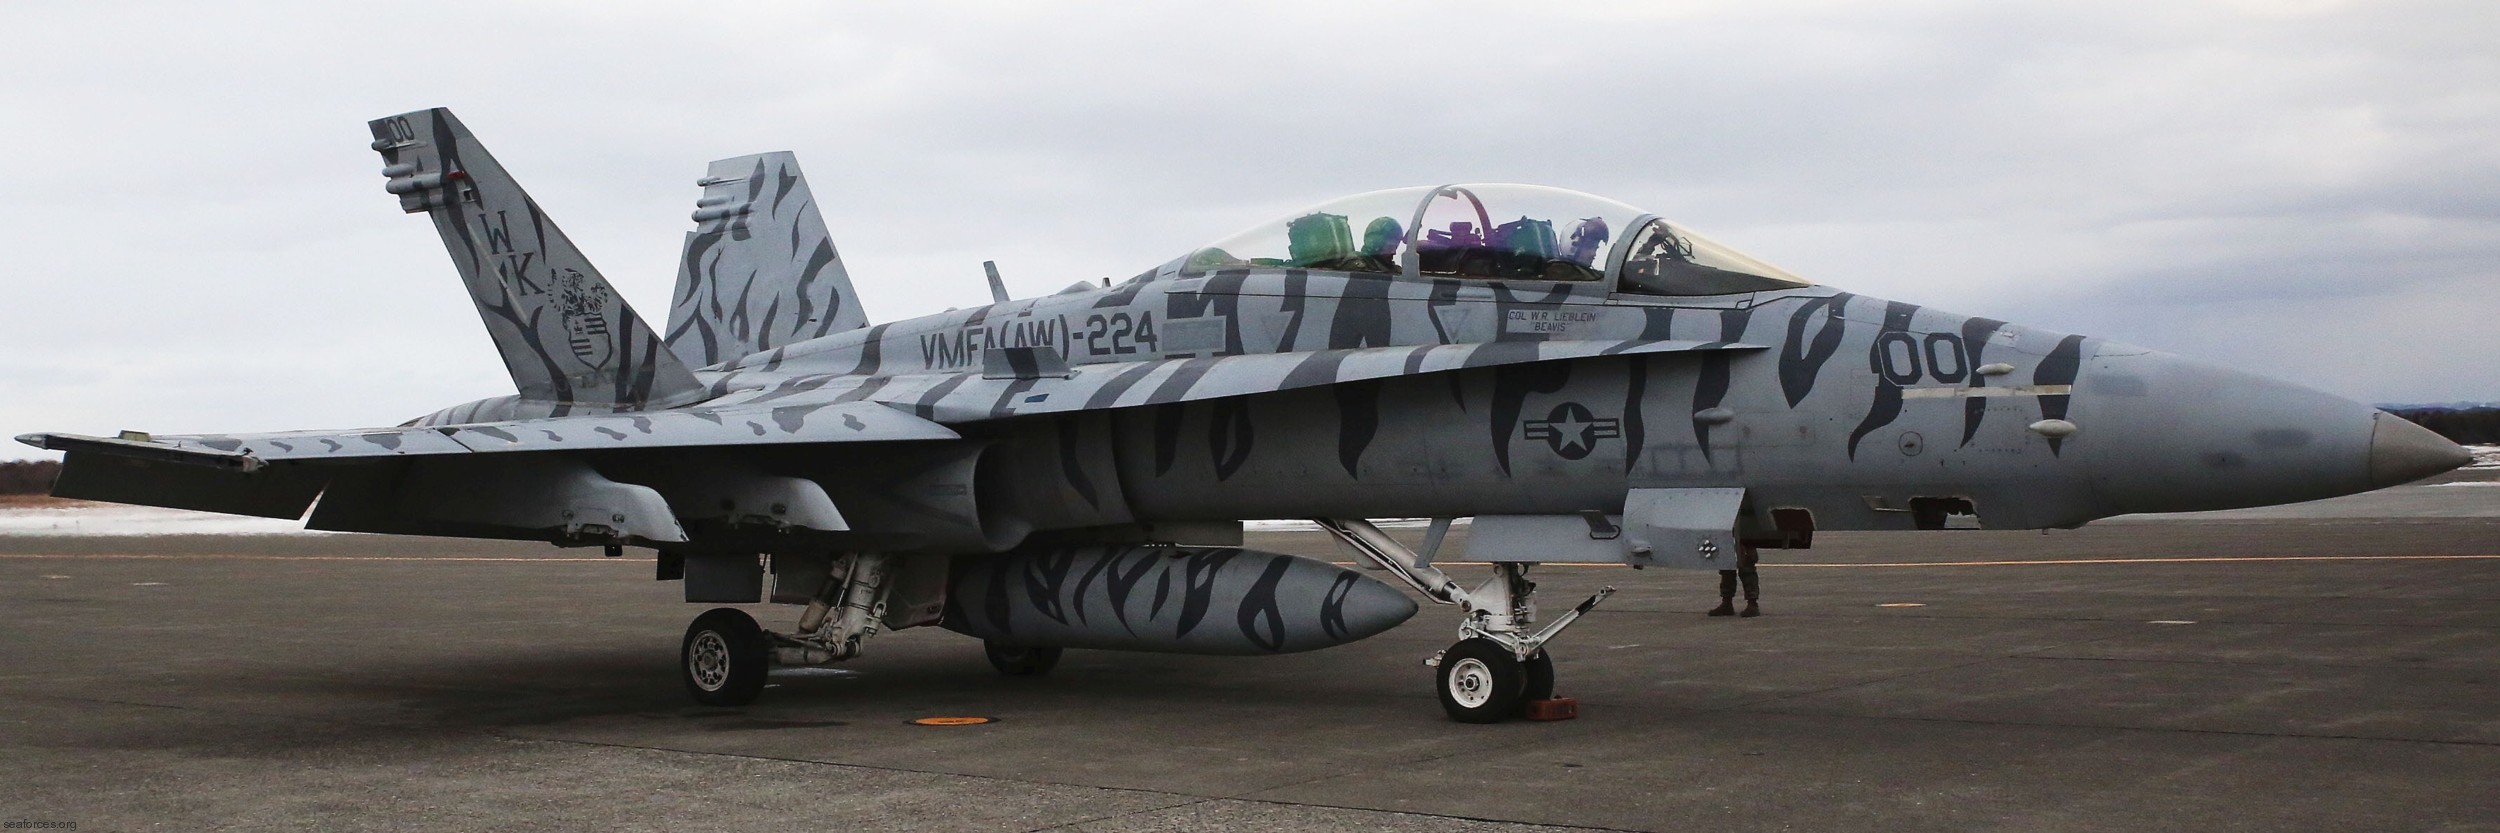 vmfa(aw)-224 bengals marine fighter attack squadron usmc f/a-18d hornet 33